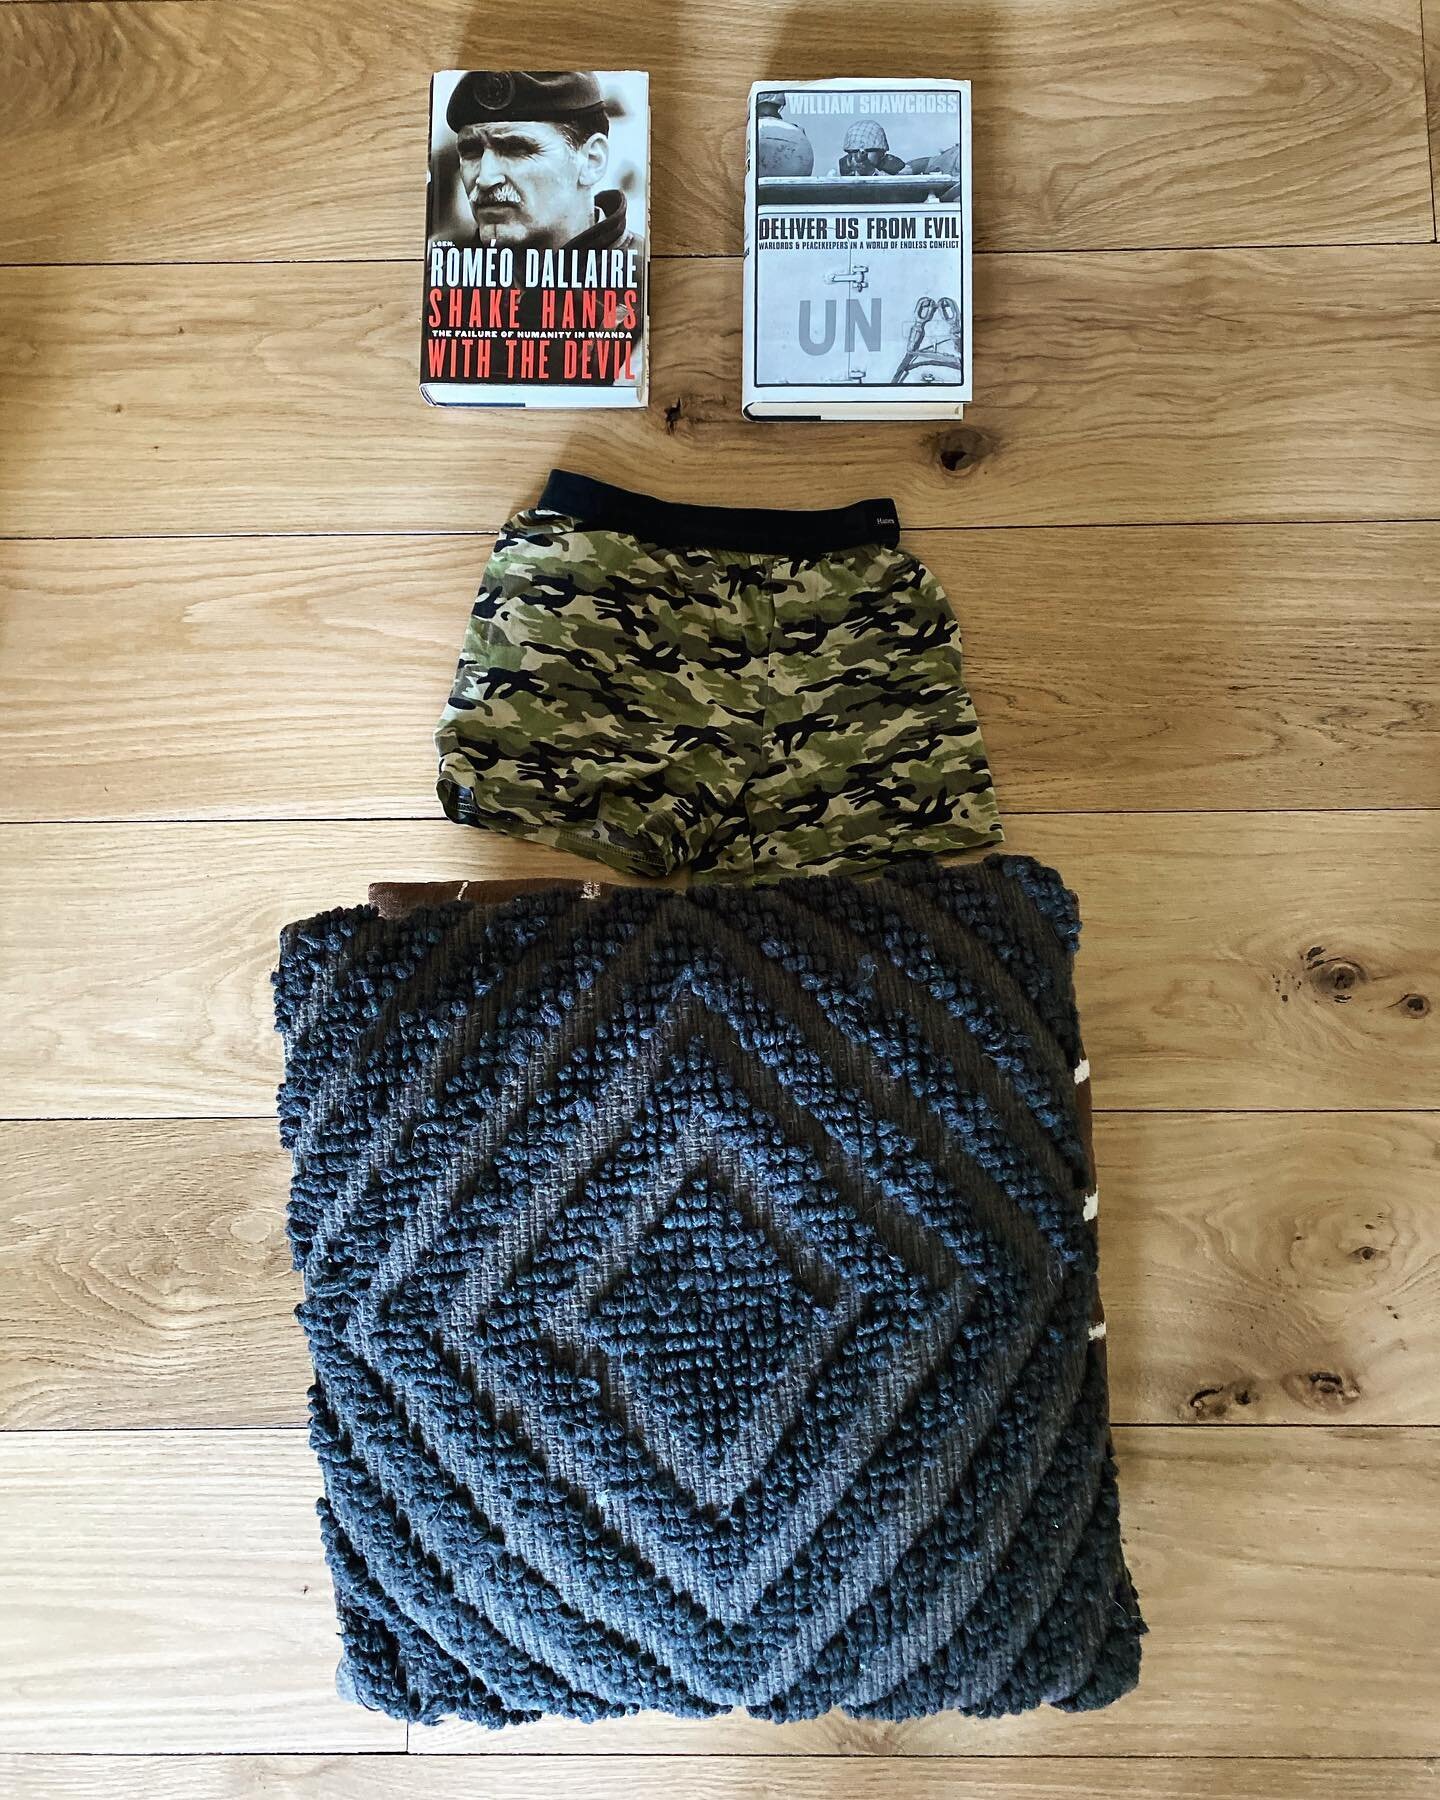 For today&rsquo;s class you will need:
🏋️2 x awesome books that are same size 
🏋️ anything eith elastic. My sons boxer shorts are perfect, thank god there&rsquo;s no holes. They are obvs washed
🏋️ one or two pillows depending how hardcore you want